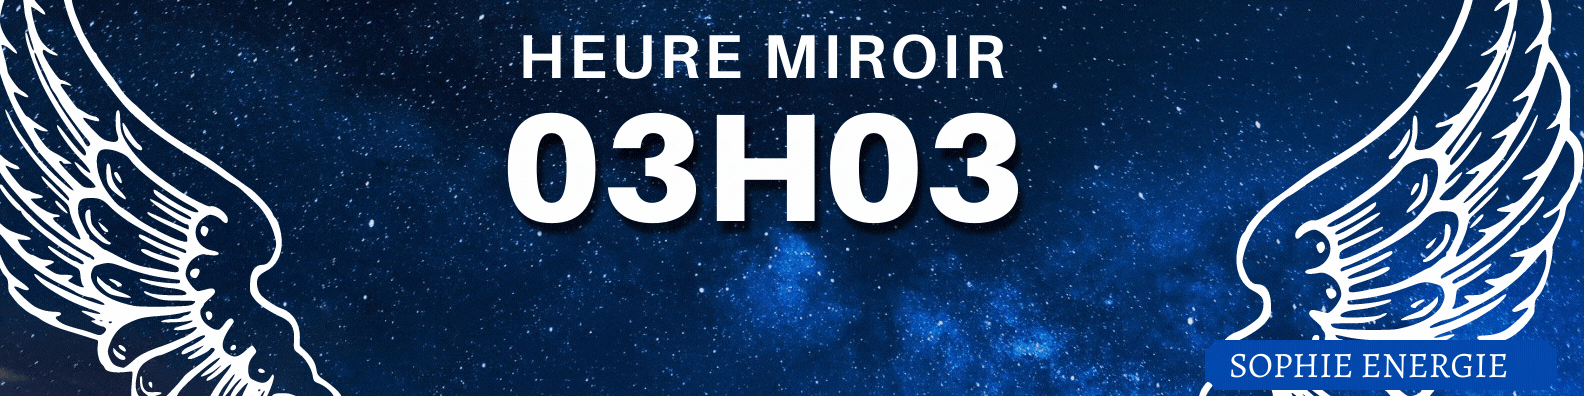 HEURE MIROIR anges 03h03